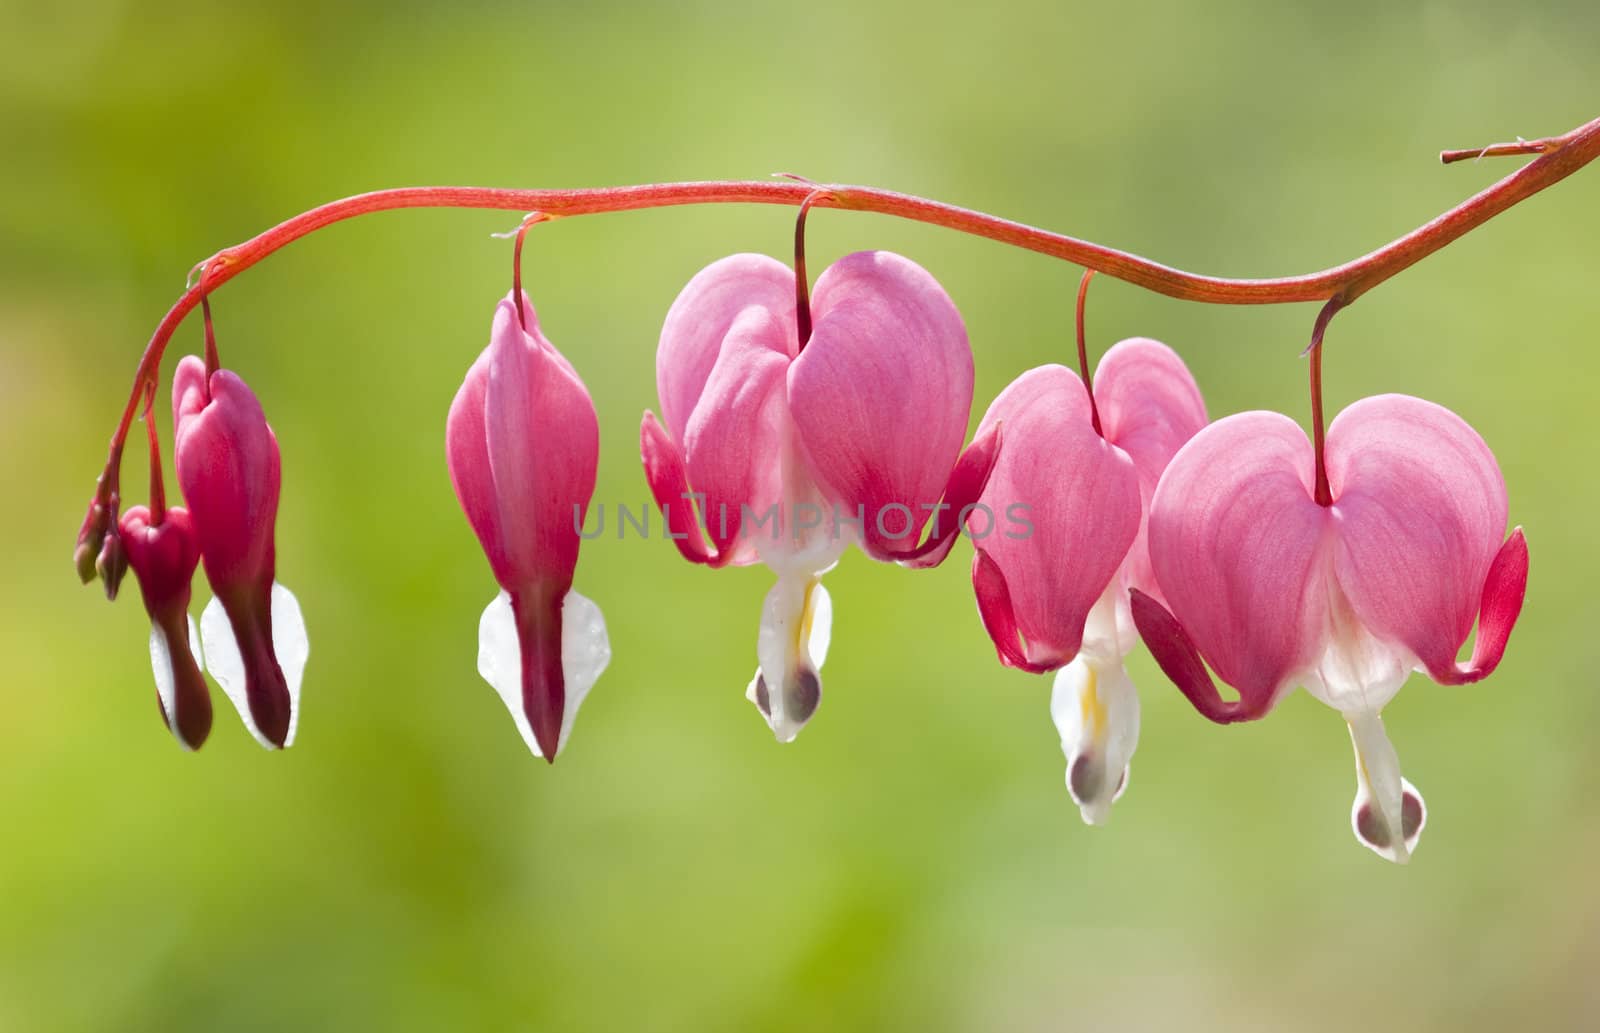 Flowers of the bleeding heart plant, Dicentra spectabilis